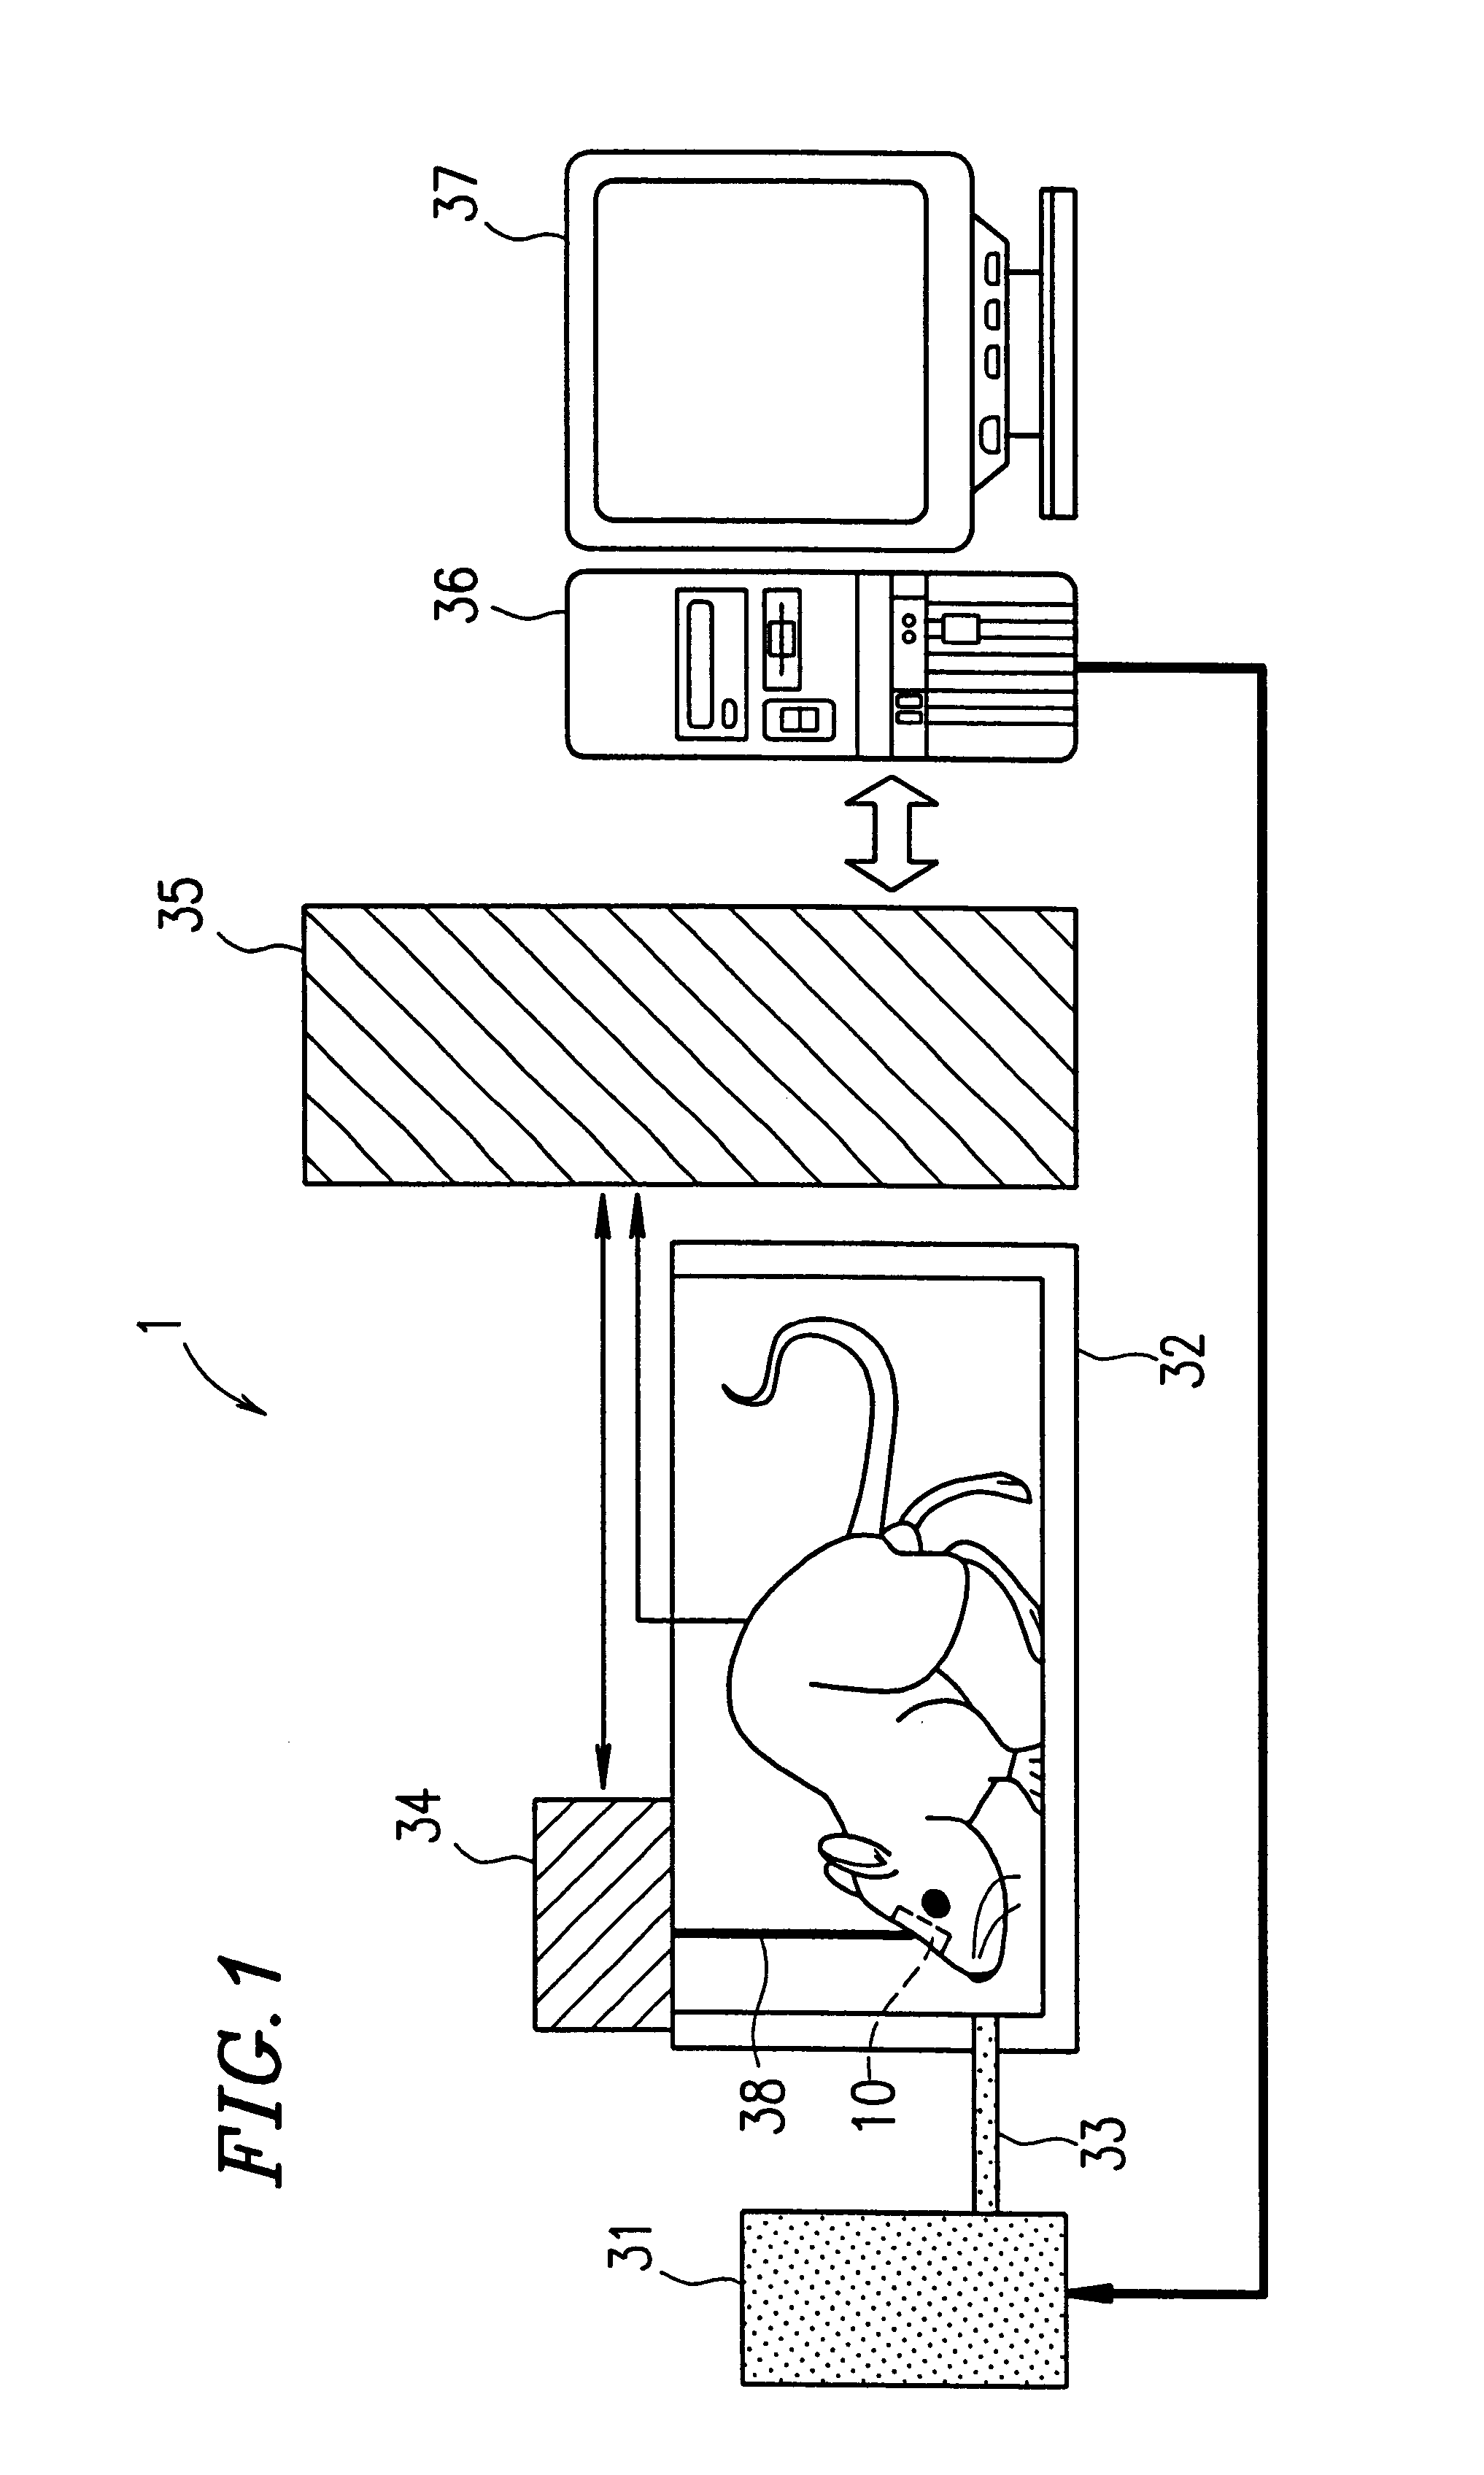 Apparatus and method for screening, olfactory mucosa stimulating compound found by the screening method, and therapeutic apparatus and electrode section for measurement